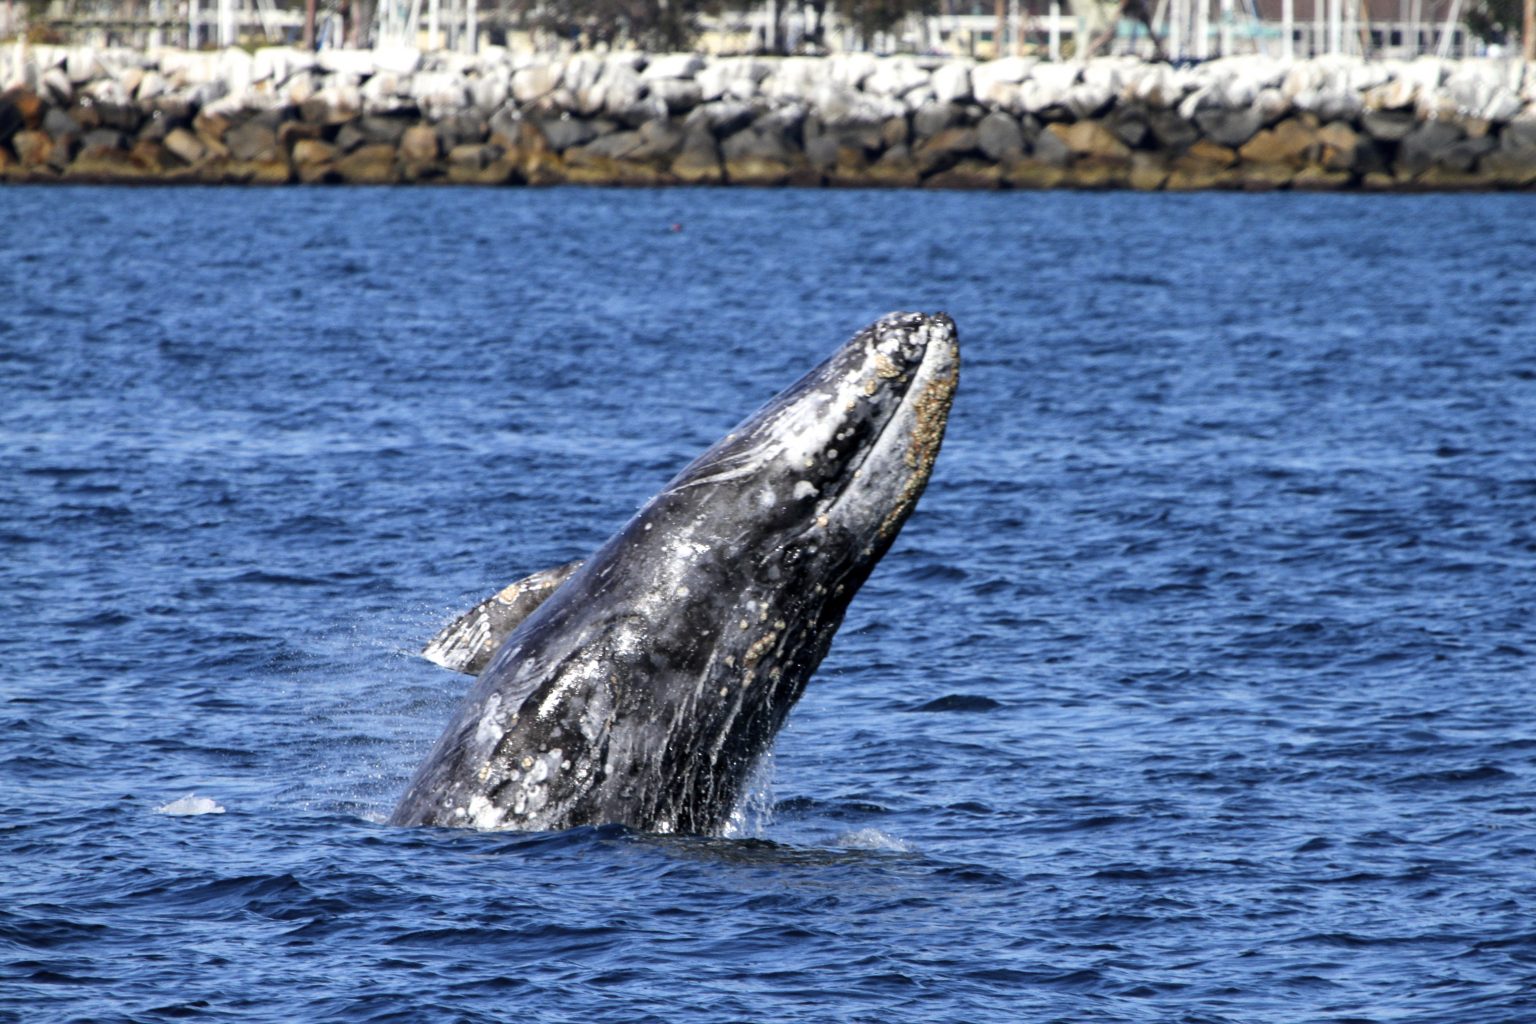 Whale Watching at Dana Point Harbor - L.A. Parent